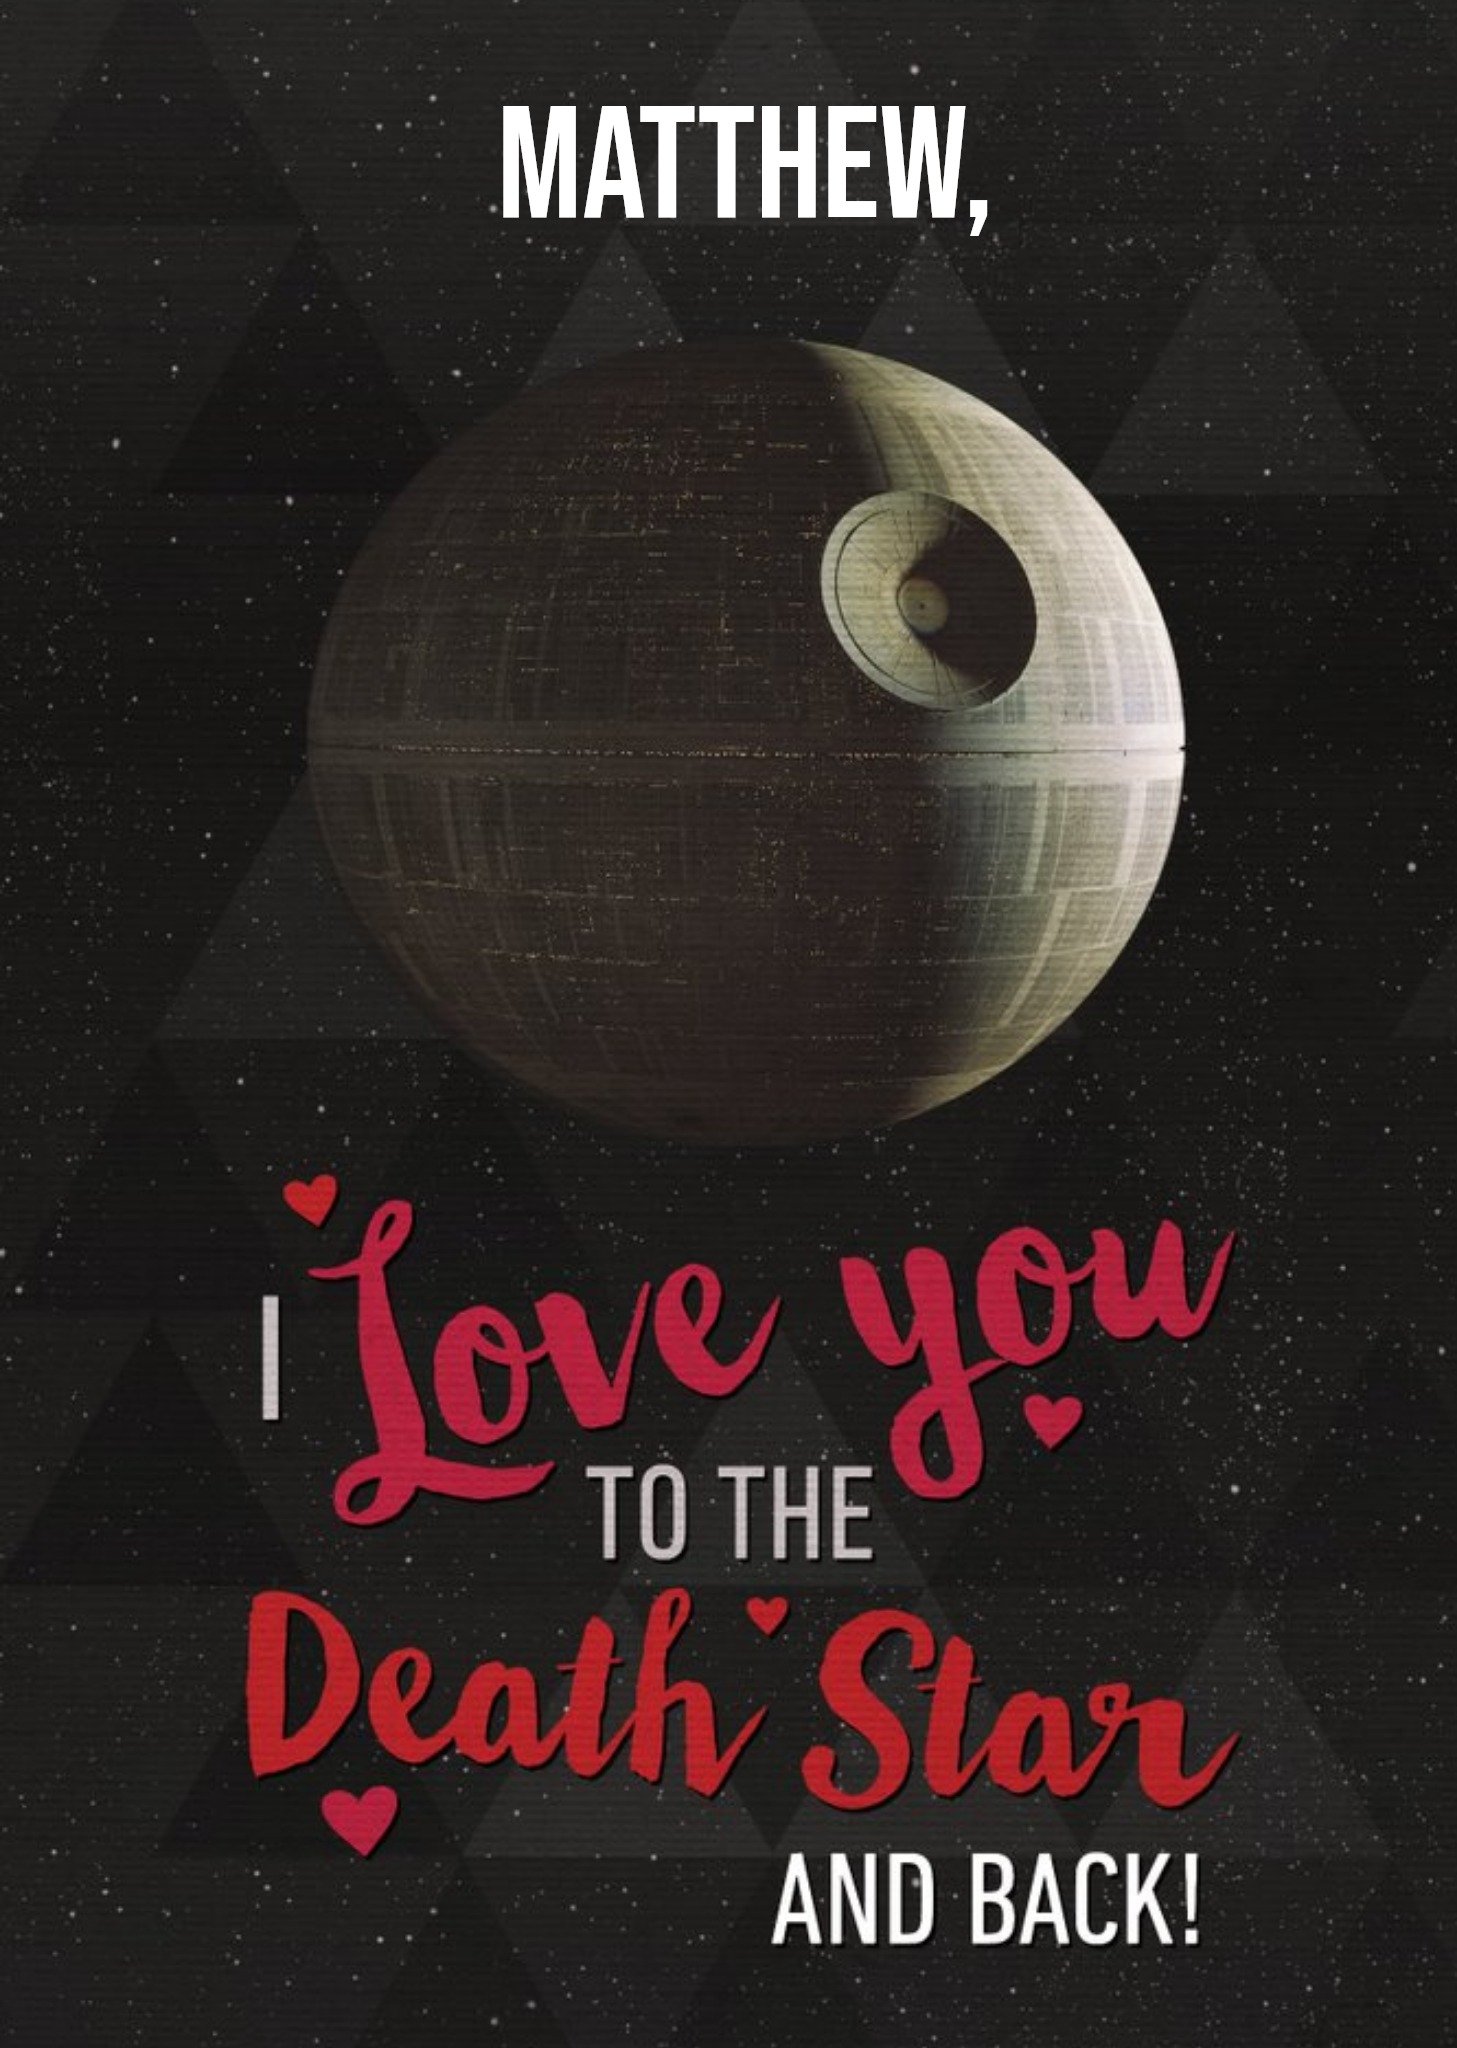 Disney Star Wars I Love You To The Death Star And Back Valentines Day Card Ecard